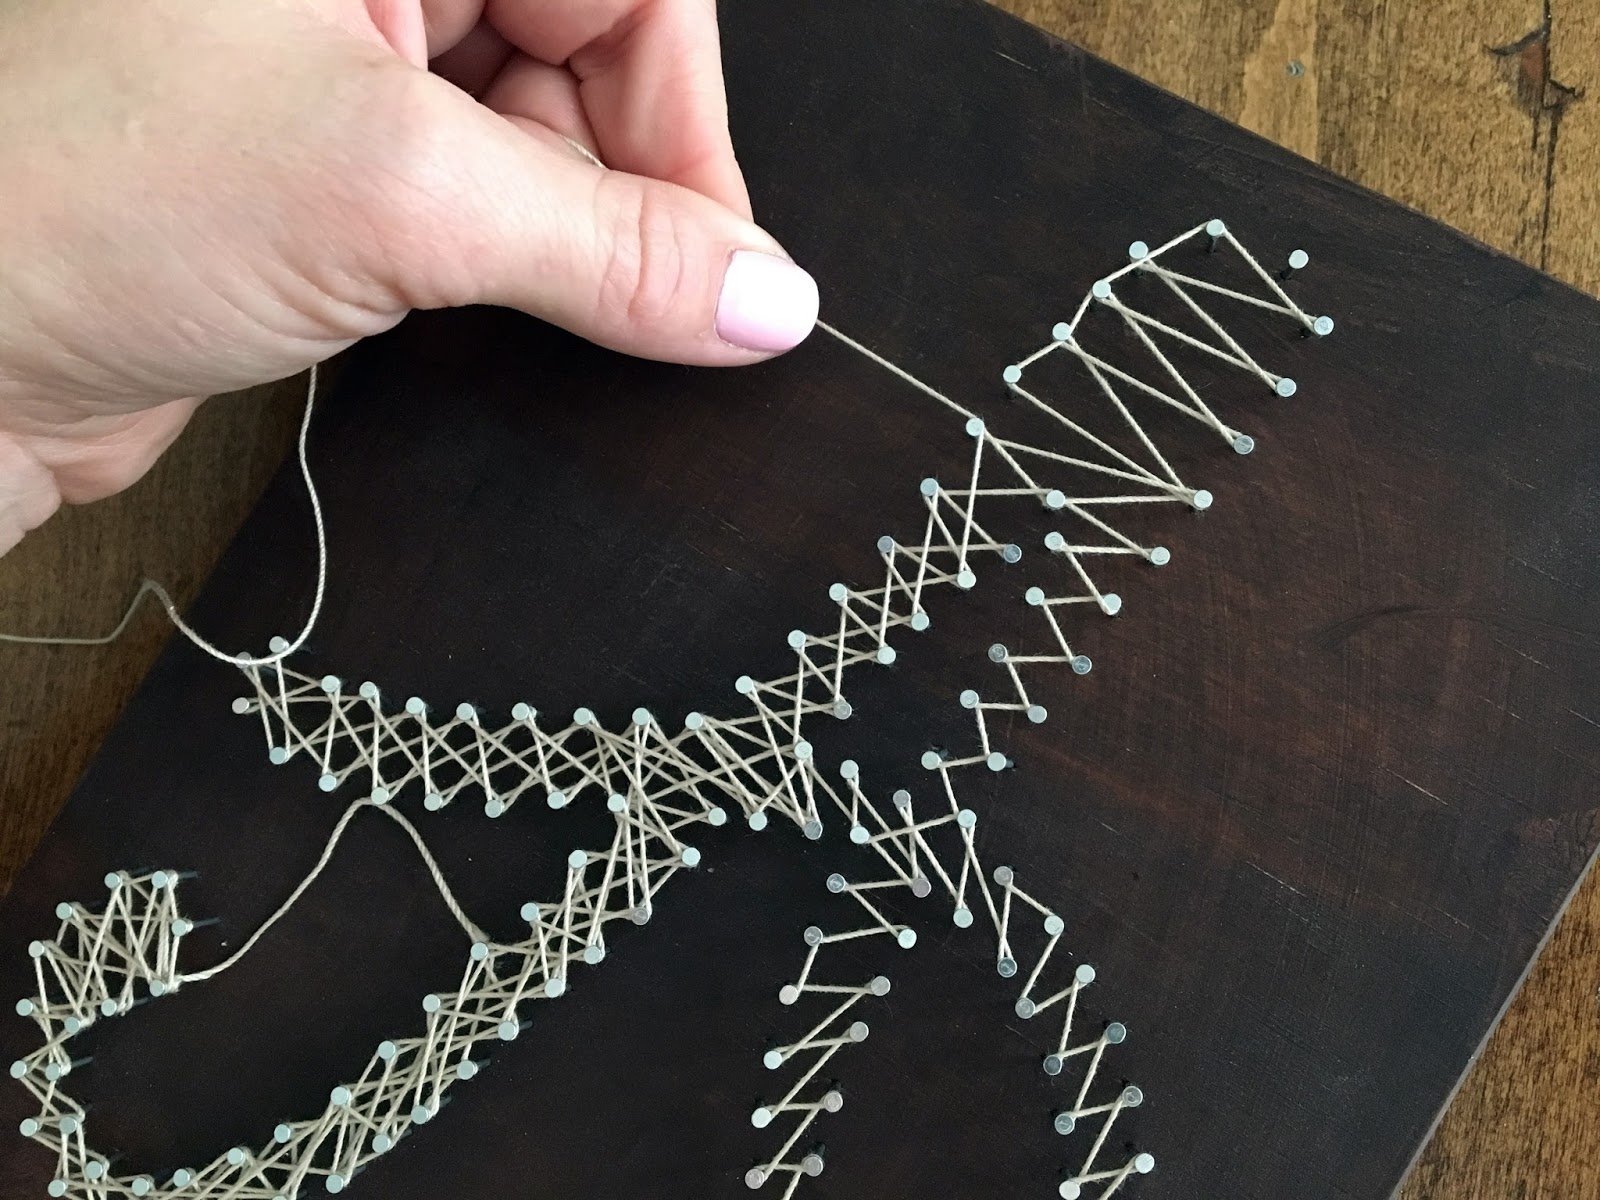 Rustic Nail and String Art Patterns - wide 4